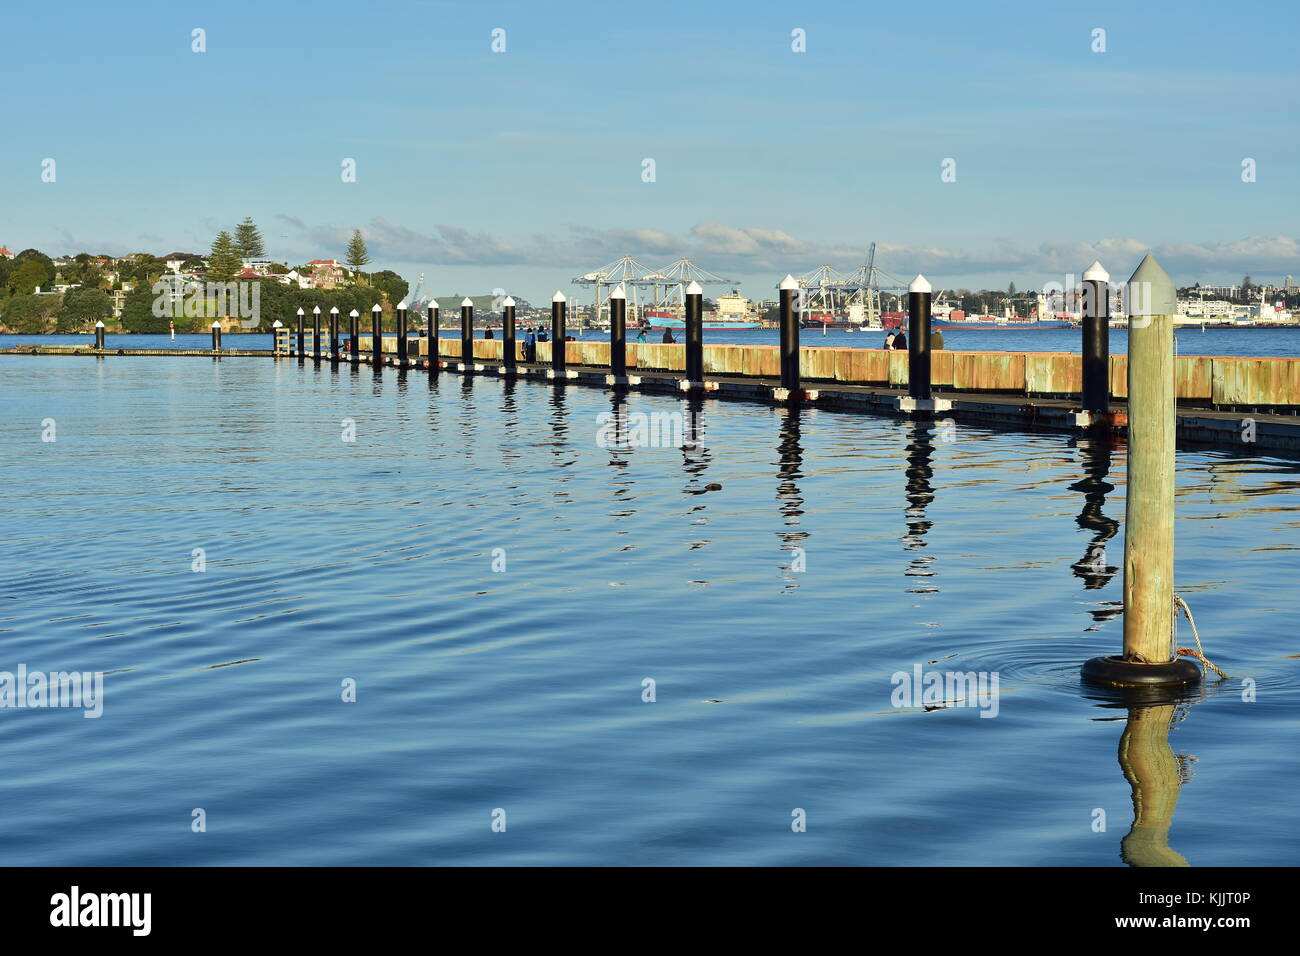 Floating Jetty With Black Poles In Bayswater In Auckland Stock Photo Alamy